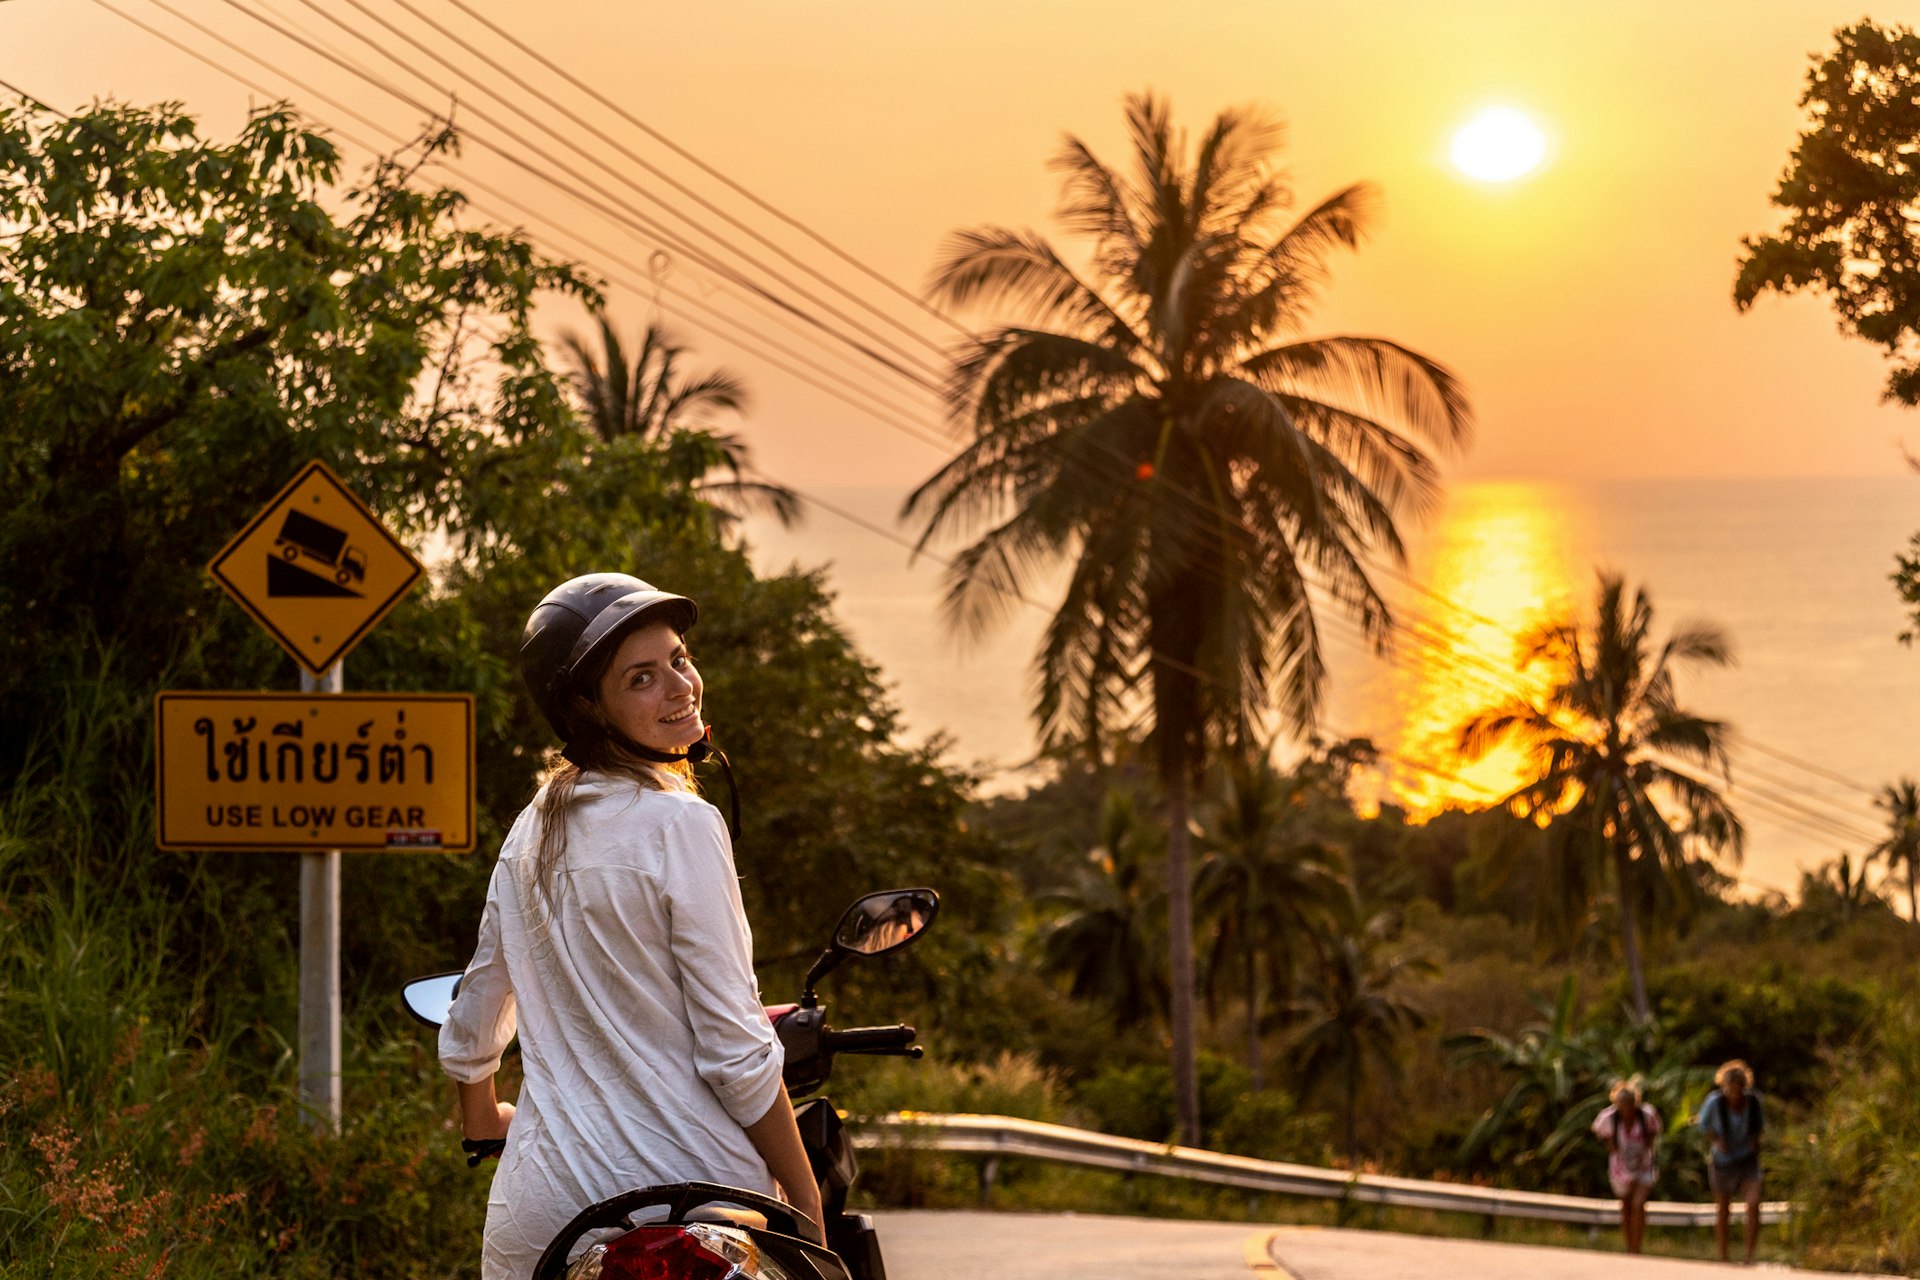 A woman in a helmet and sunglasses smiles at the camera as she rides a motorbike under palm trees in Thailand